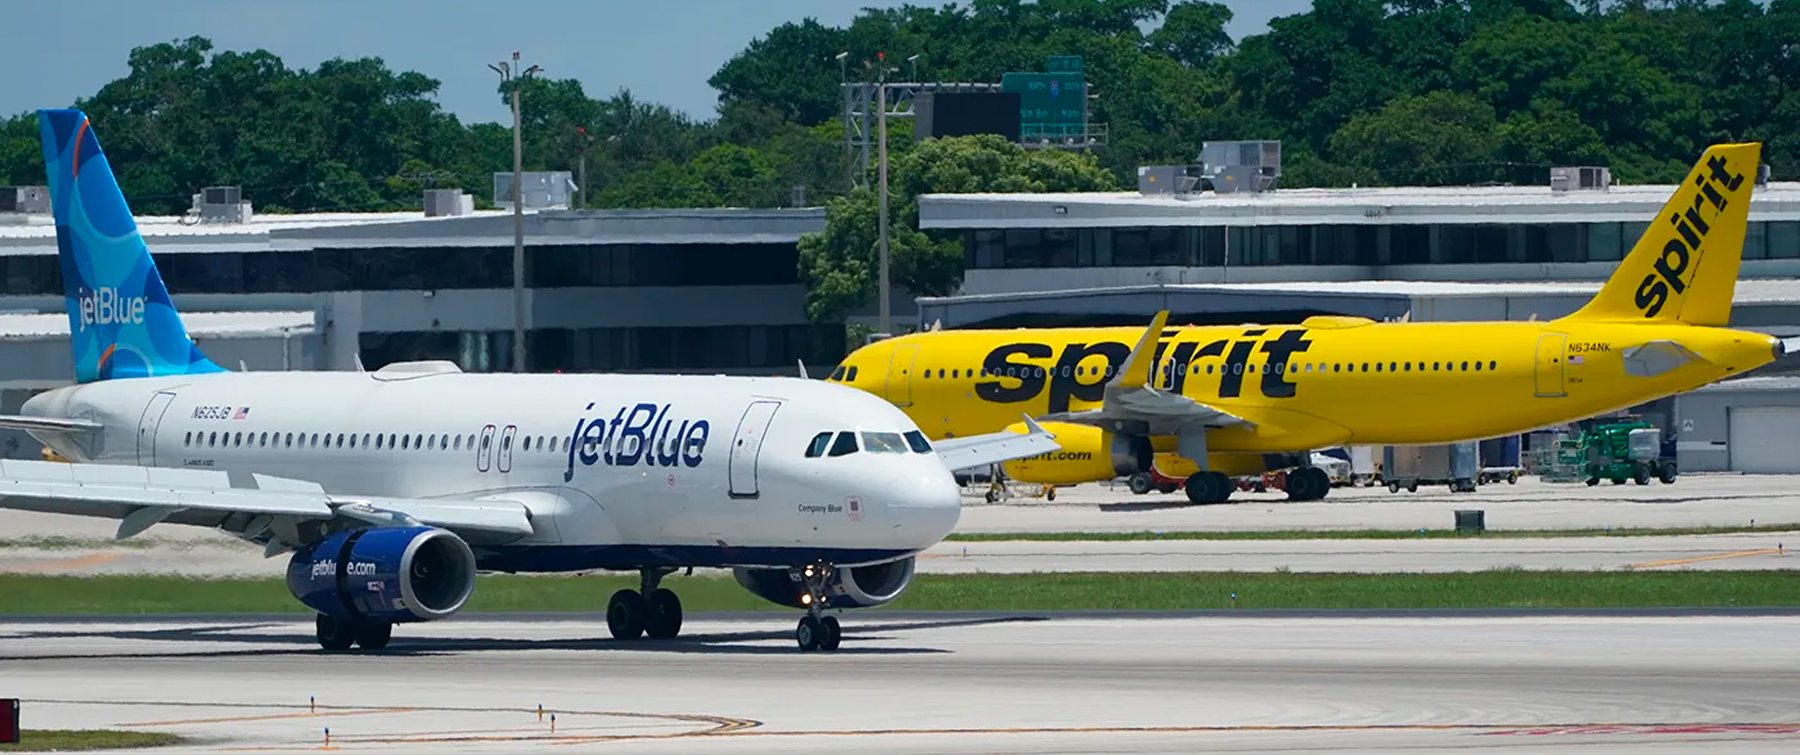 Spirit and JetBlue planes intersecting on a runway